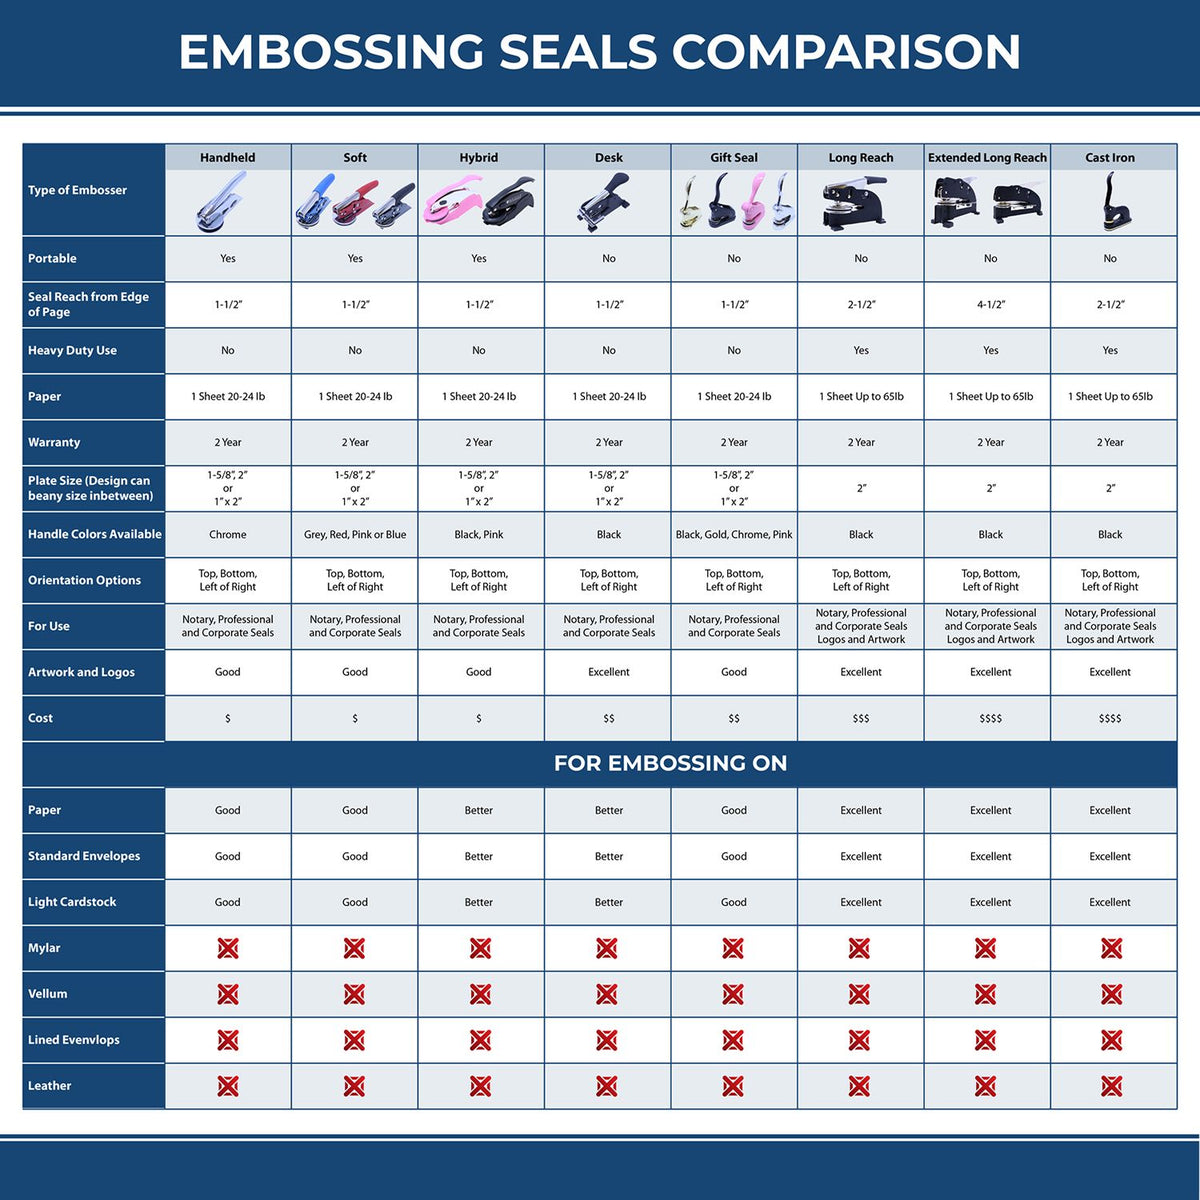 A comparison chart for the different types of mount models available for the Soft Tennessee Professional Geologist Seal